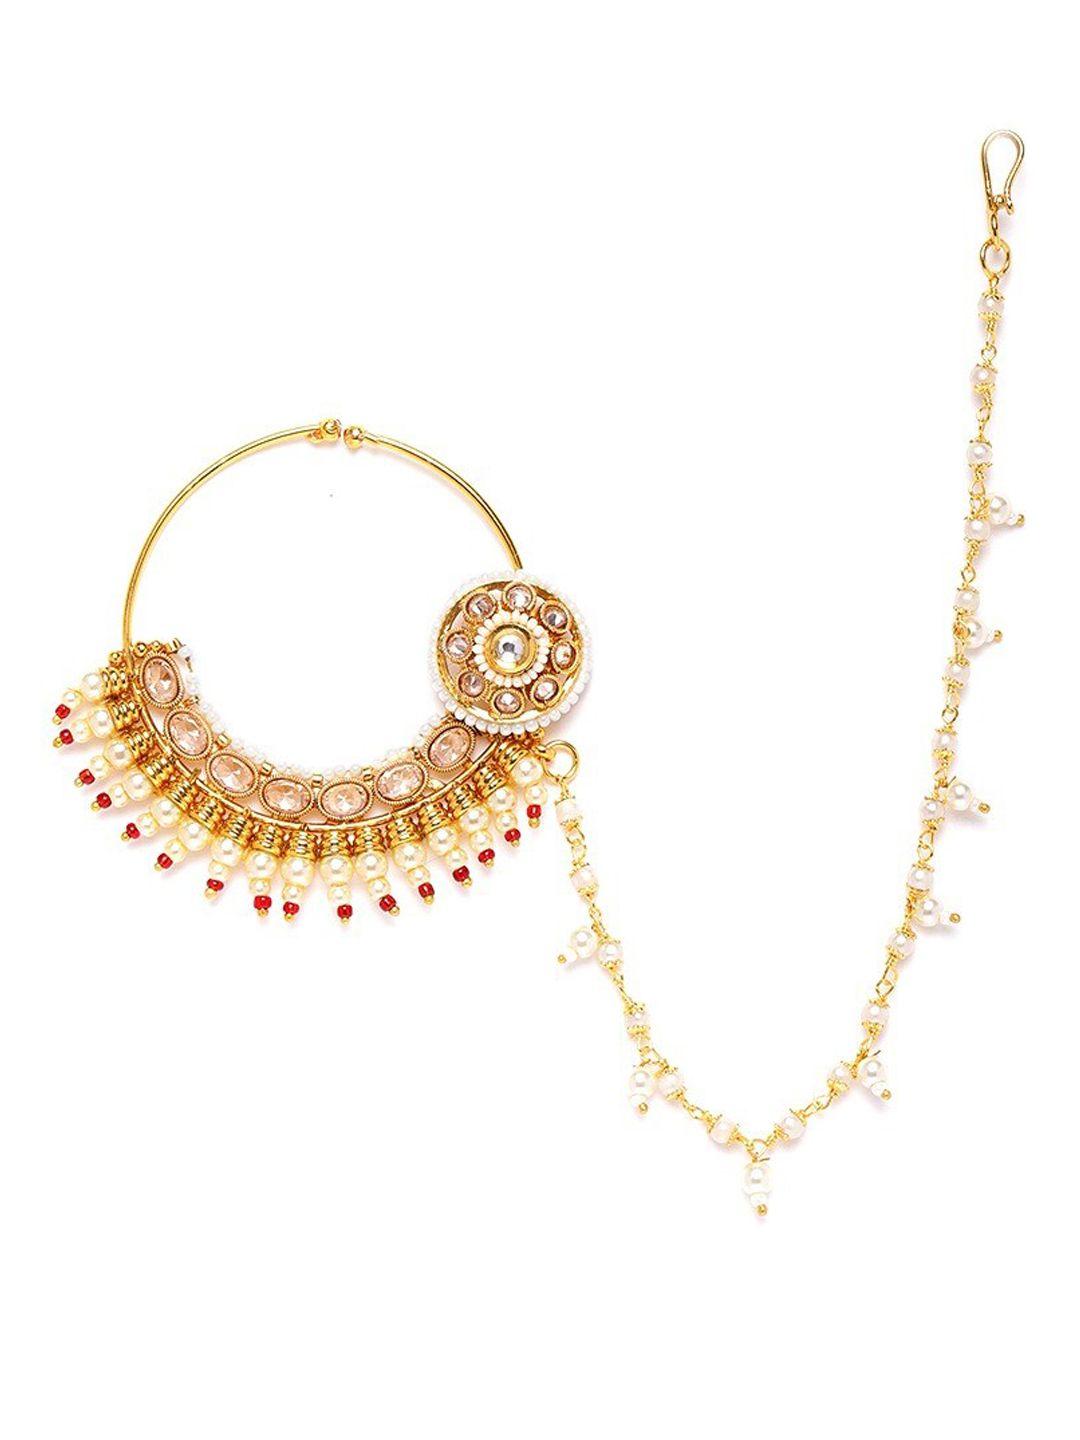 jewels-gehna-gold-plated-cz-studded-clip-on-nosepin-with-beaded-extension